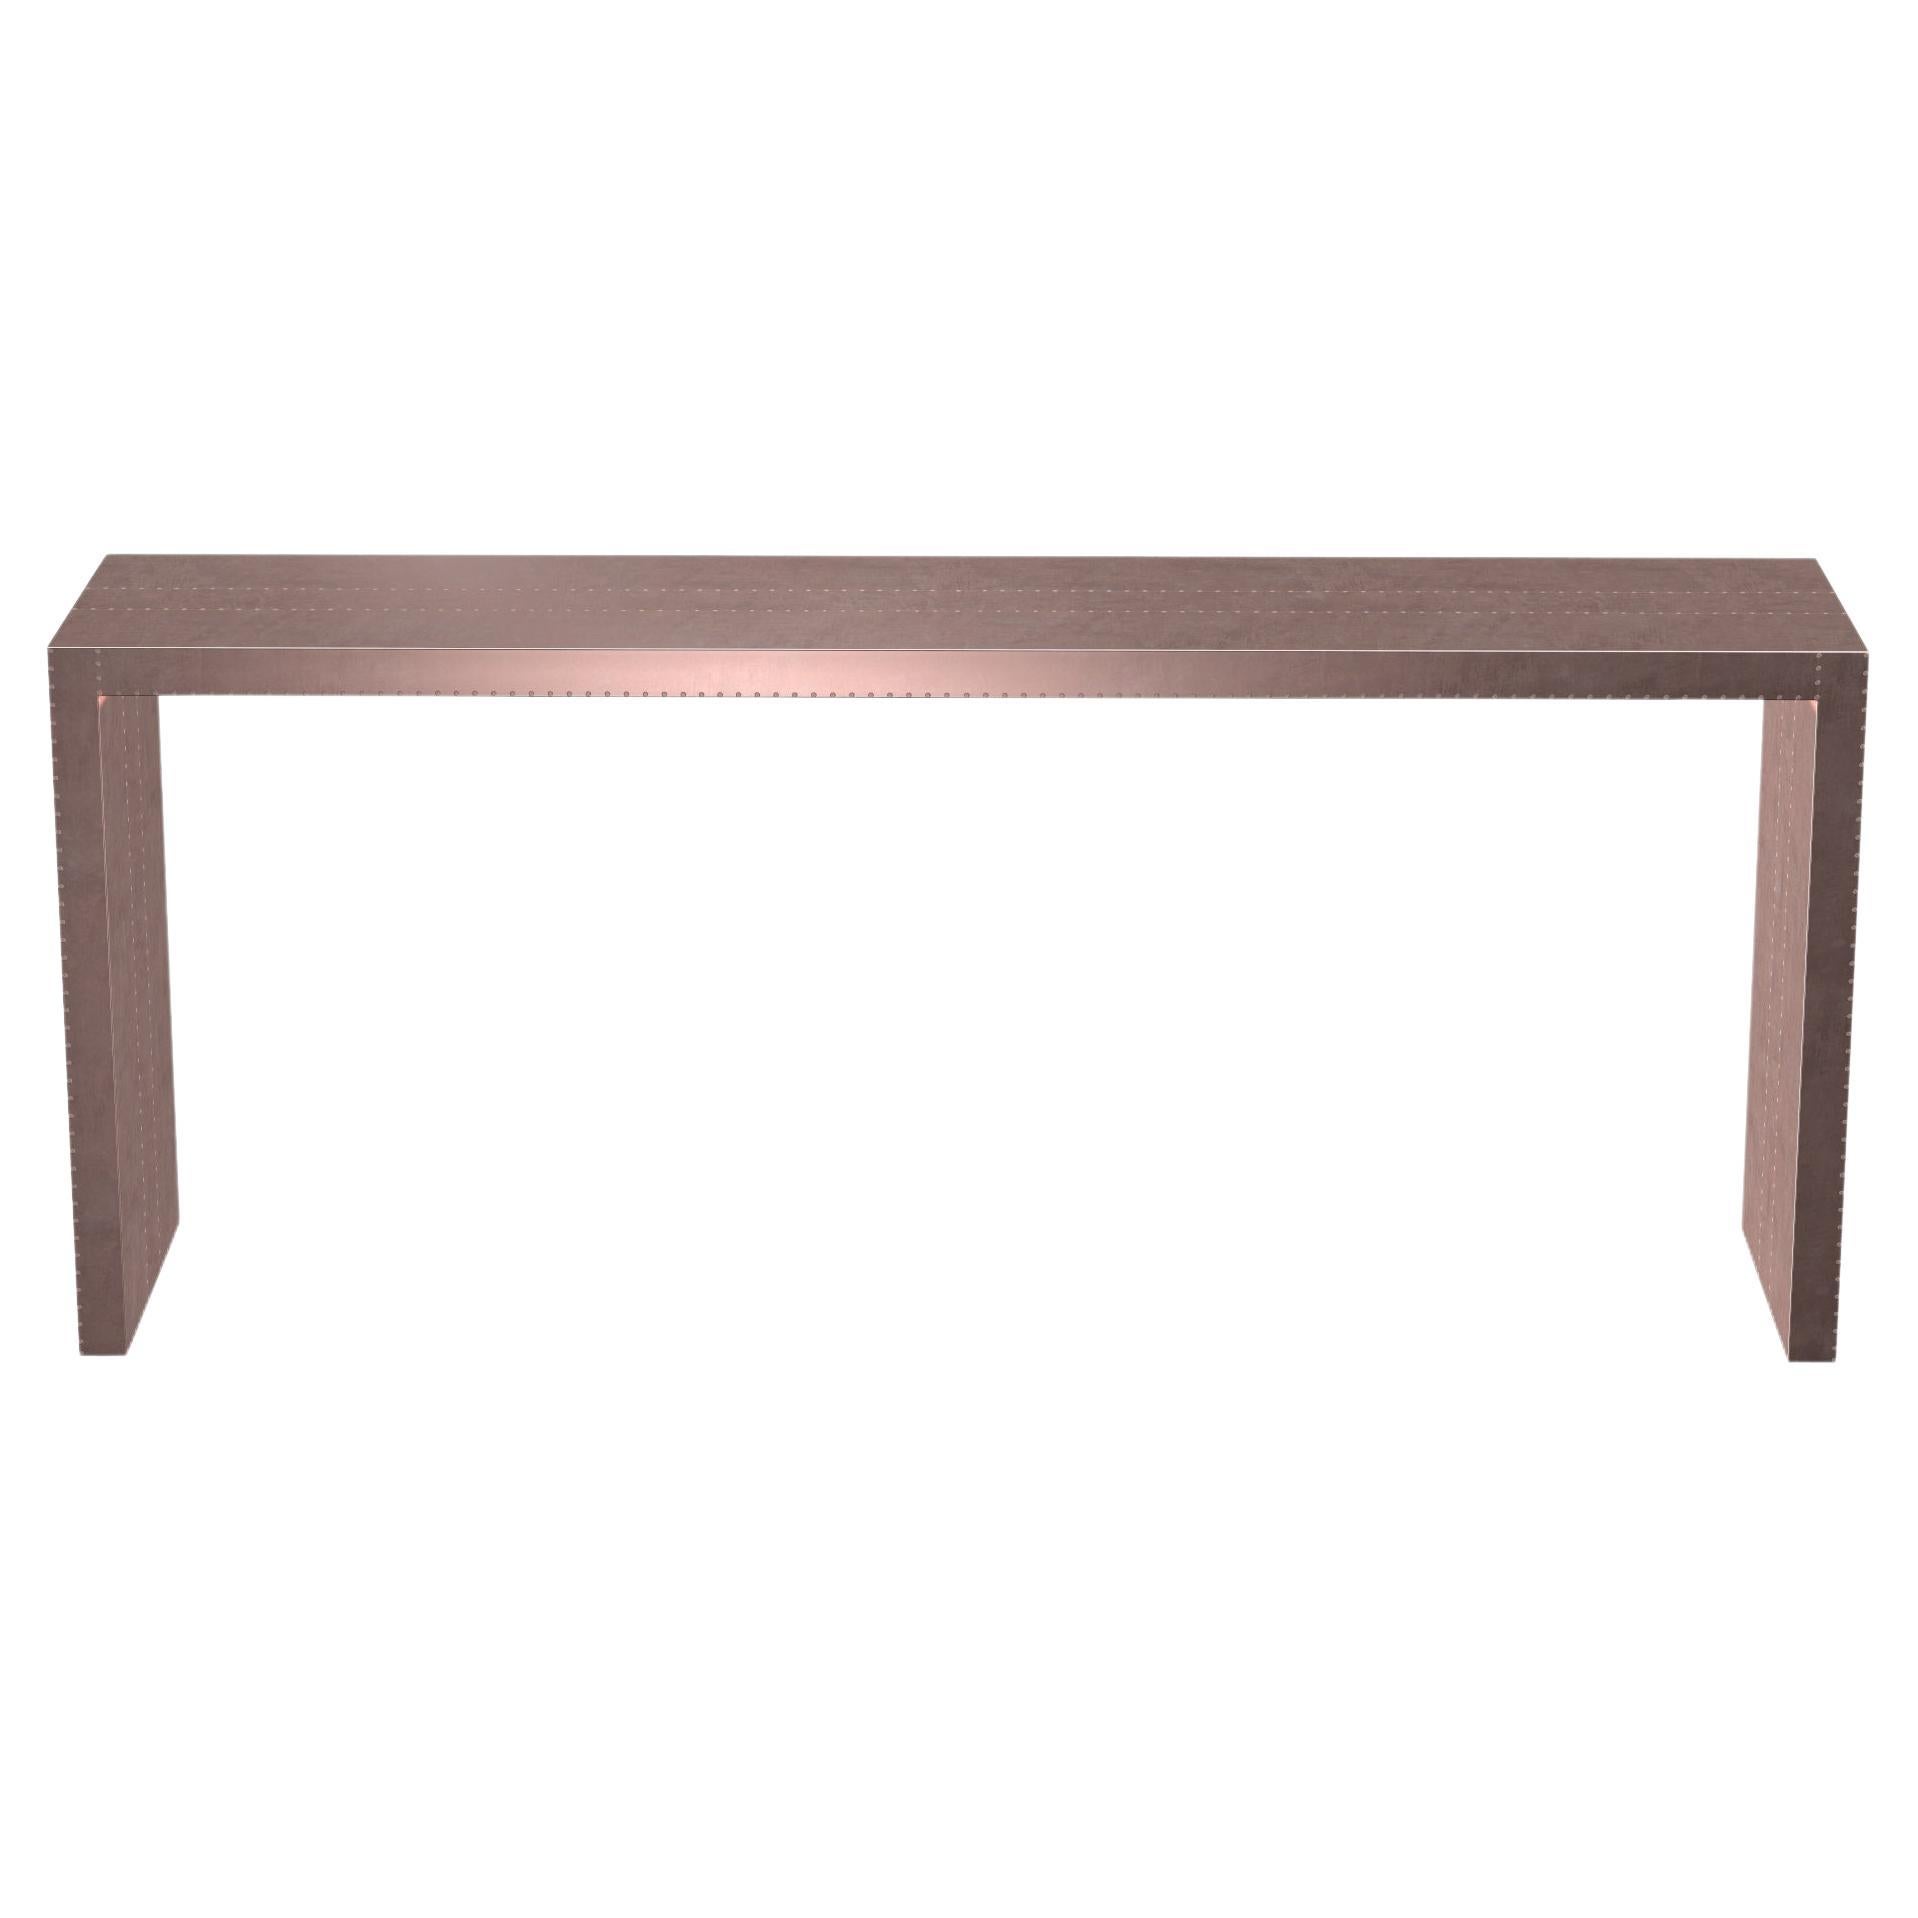 Art Deco Game Tables Rectangular Console in Smooth Copper by Alison Spear For Sale